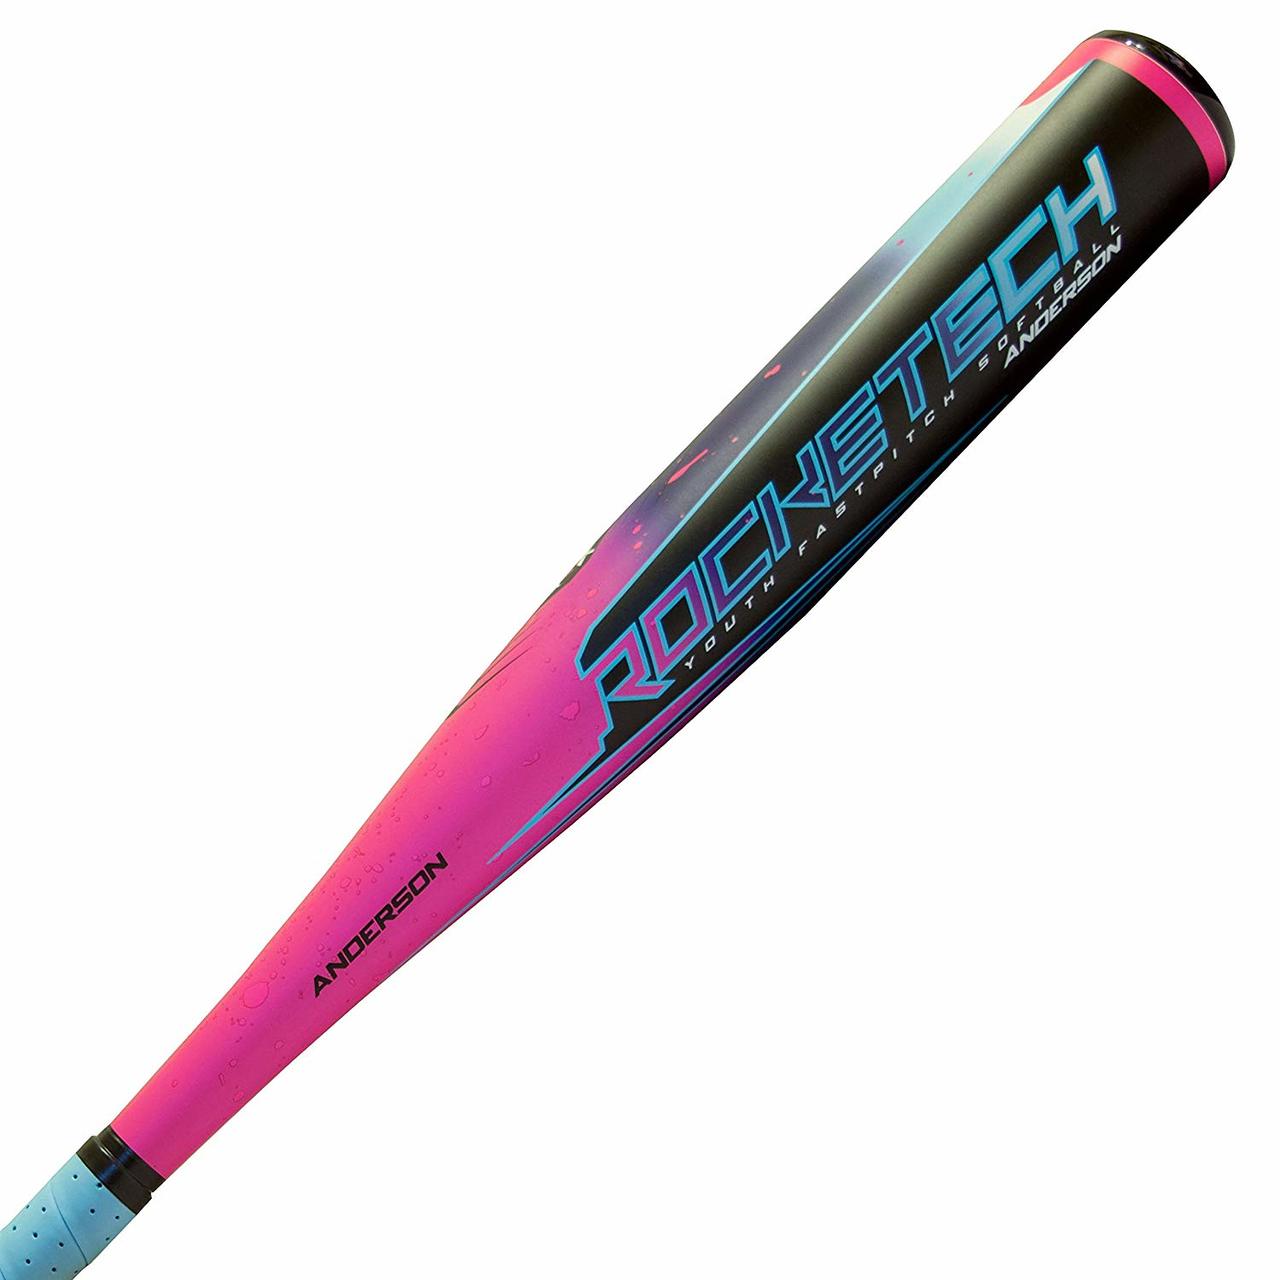 anderson-rocketech-12-youth-fastpitch-softball-bat-28-inch-16-oz 017036-2816 Anderson 874147008492 Ideal for girls ages 7-10 2 ¼” Barrel / -12 Drop